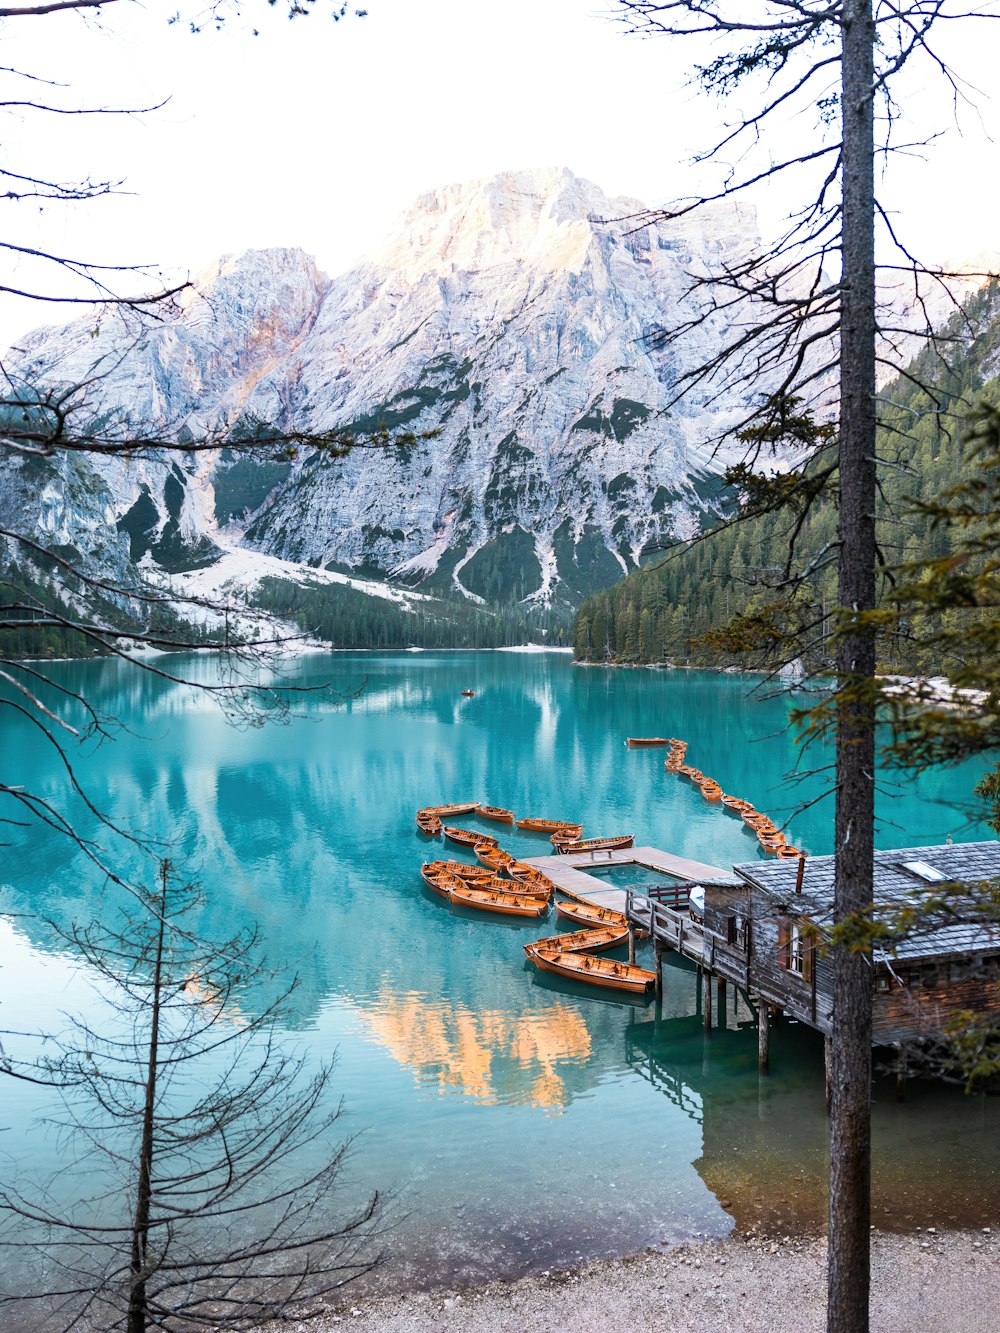 a lake surrounded by mountains with a dock in the middle